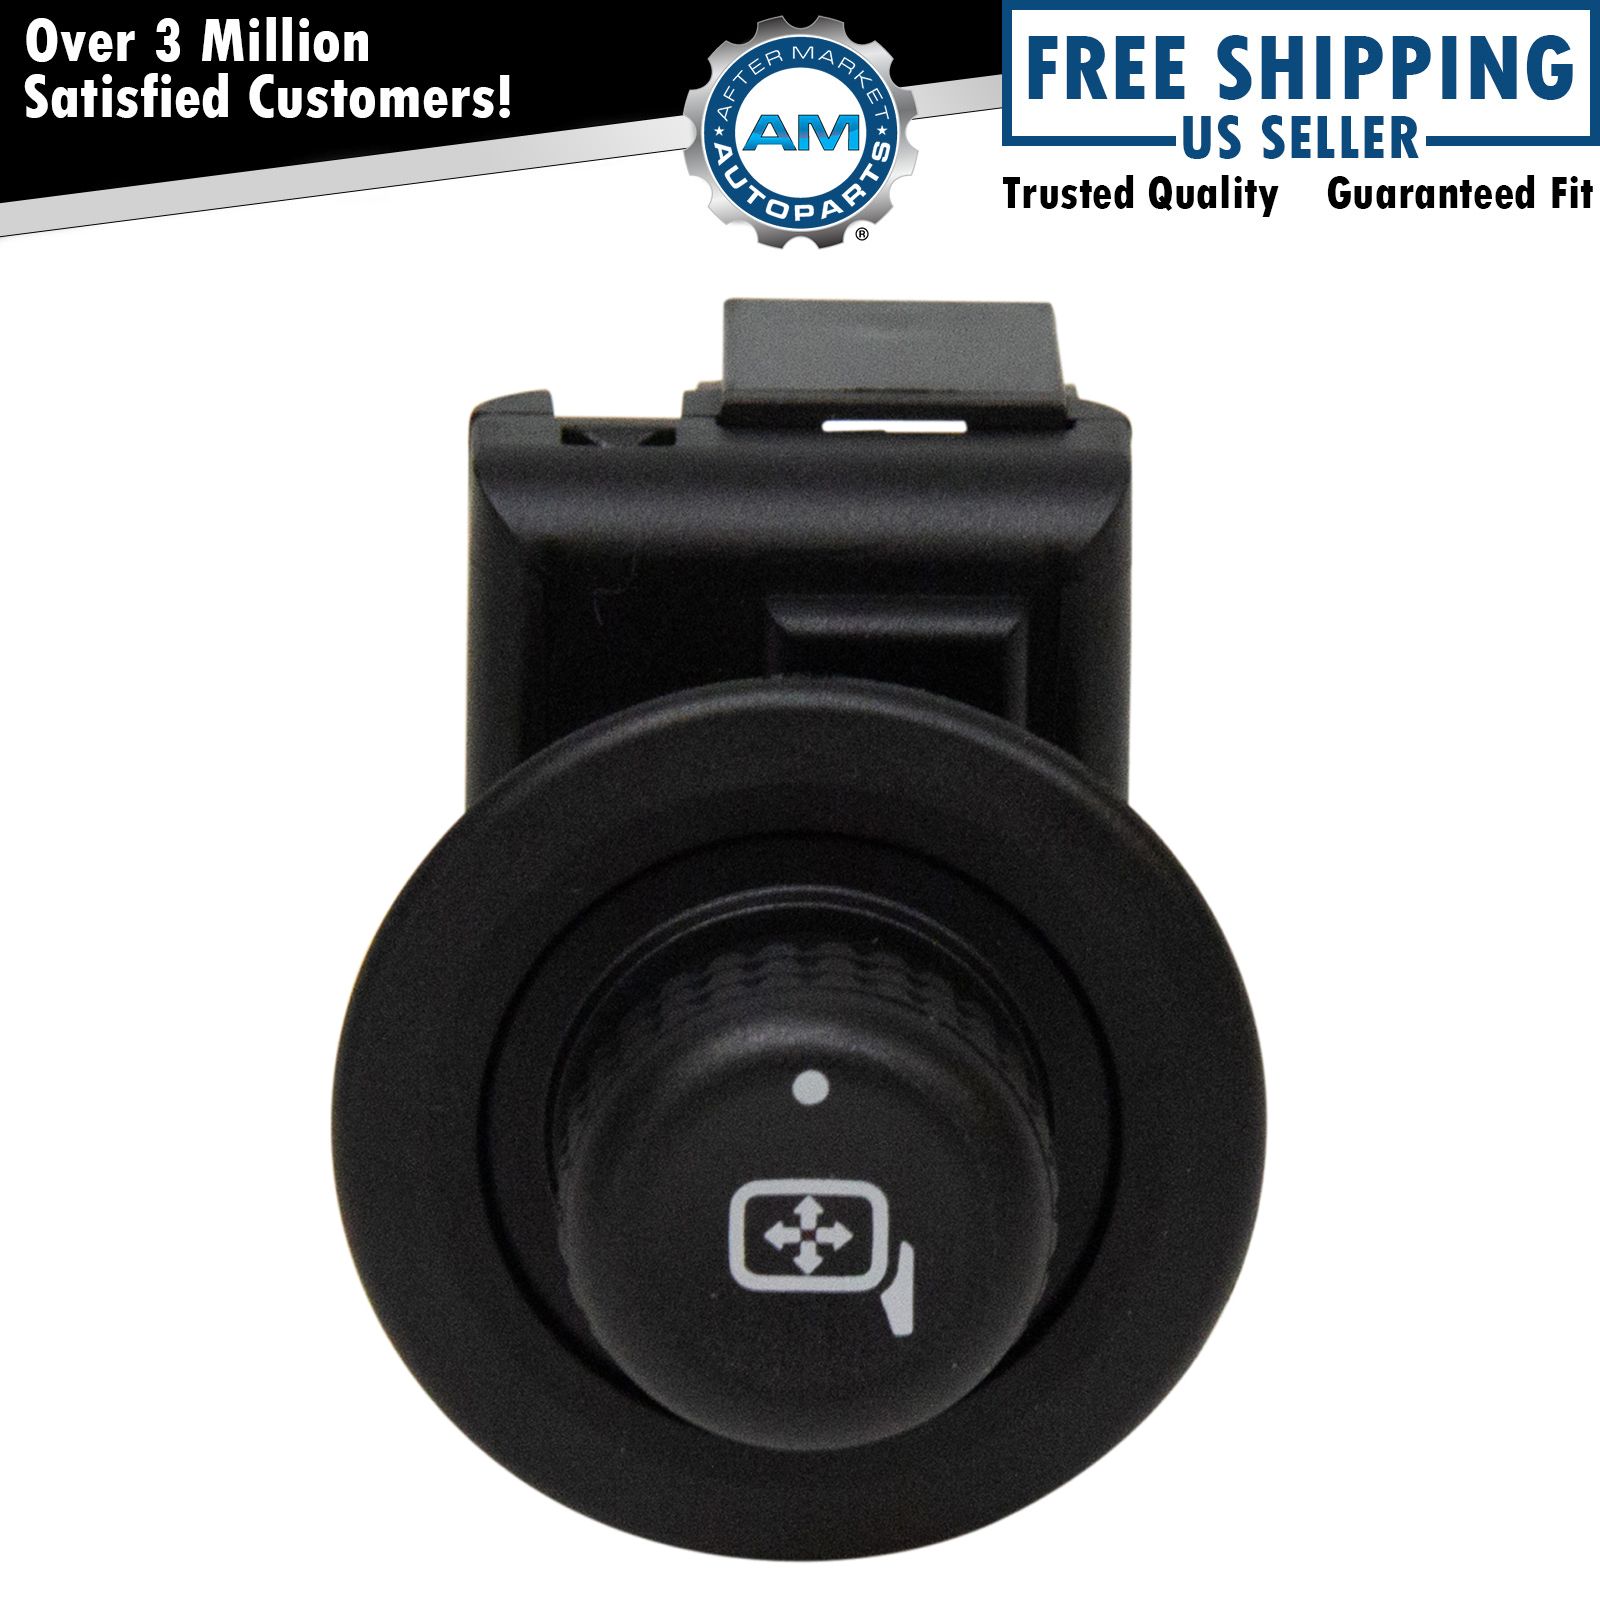 Power Mirror Switch for Ford F-Series Truck E-Series Van Expedition Fusion New